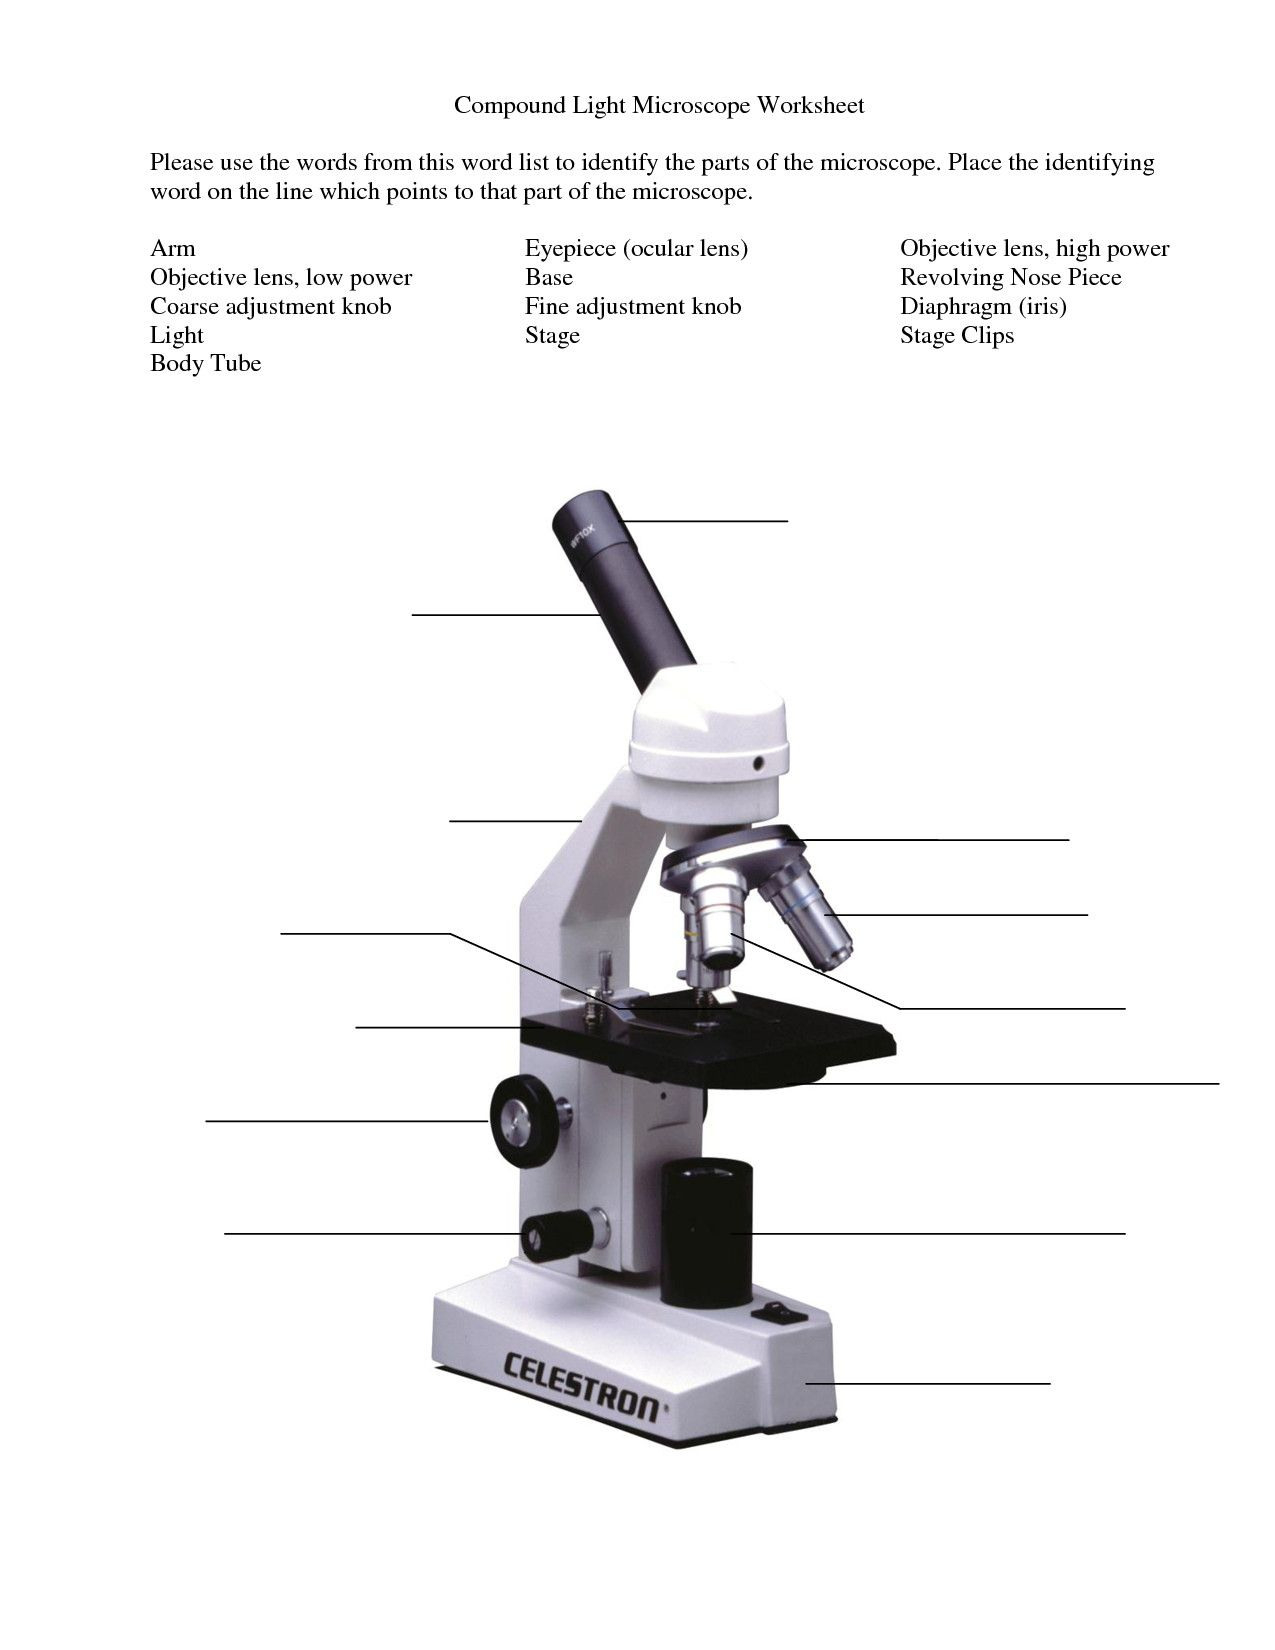 Microscope Parts Review Worksheet Answers